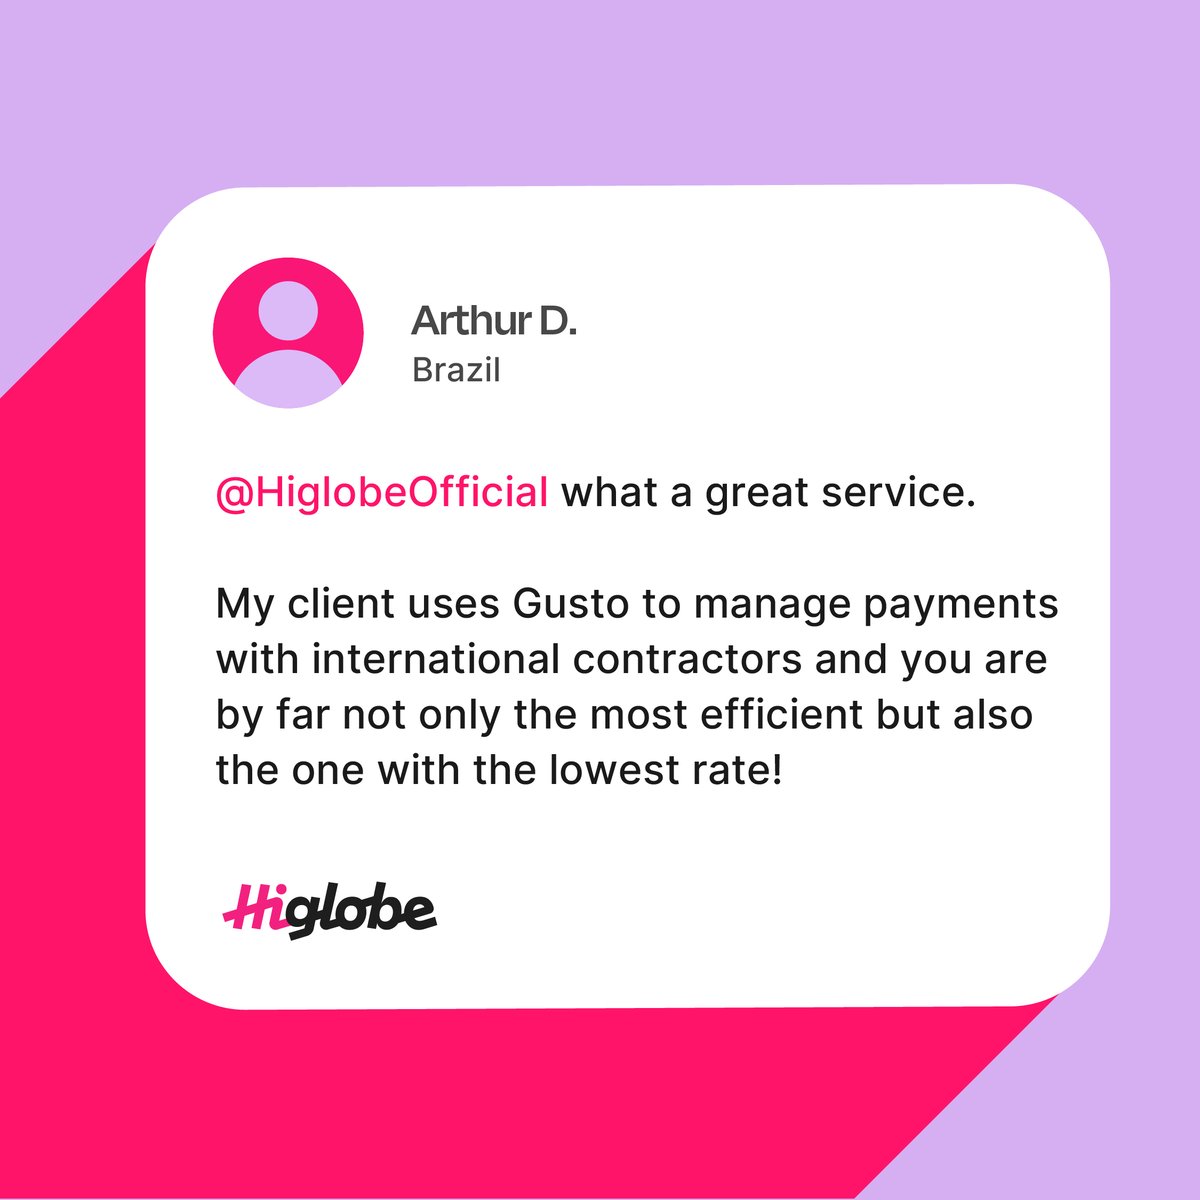 At Higlobe, we have no secrets: we offer the best payment solution to professionals! But hey, don't just take our word for it—check out what Arthur has to say about our service!

#GlobalPayments #Higlobe #Testimonials